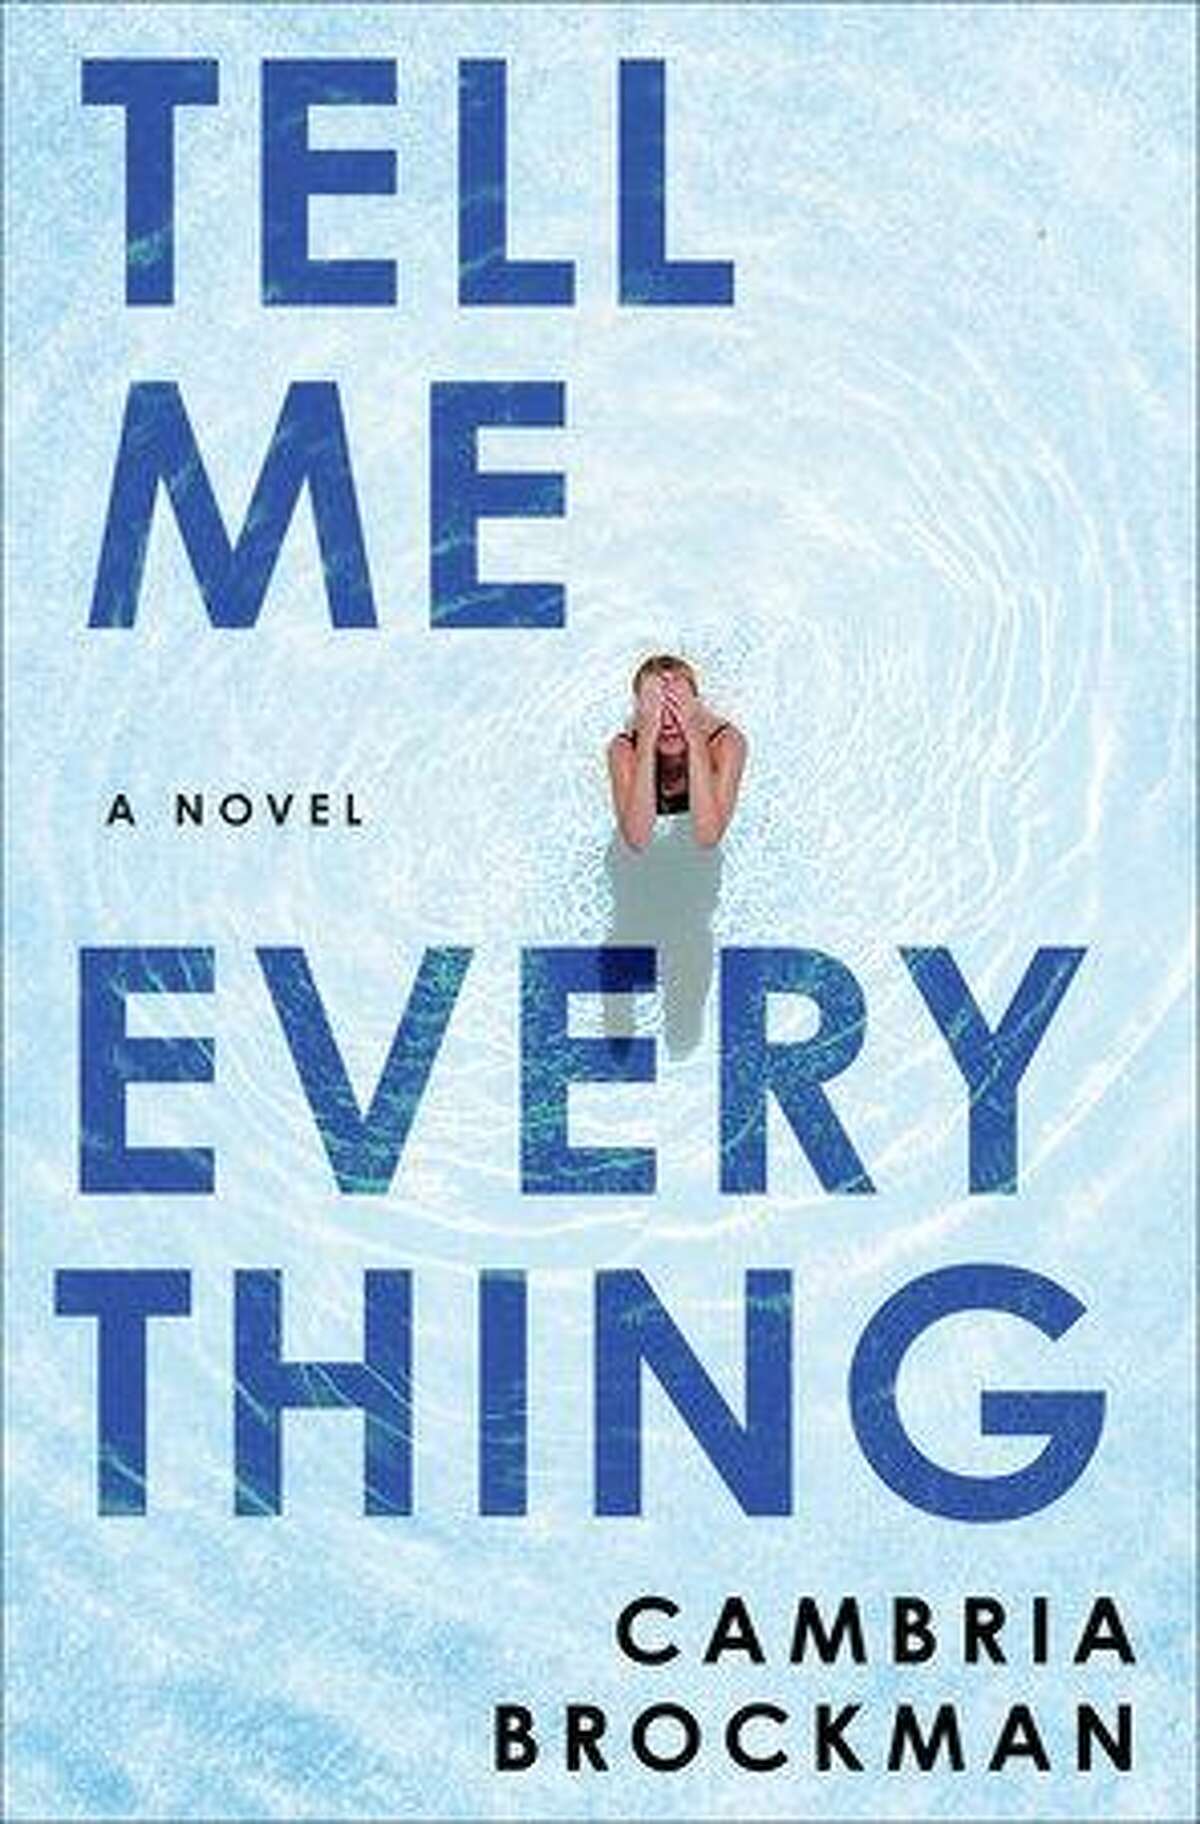 “Tell Me Everything” is Cambria Brockman’s first novel.